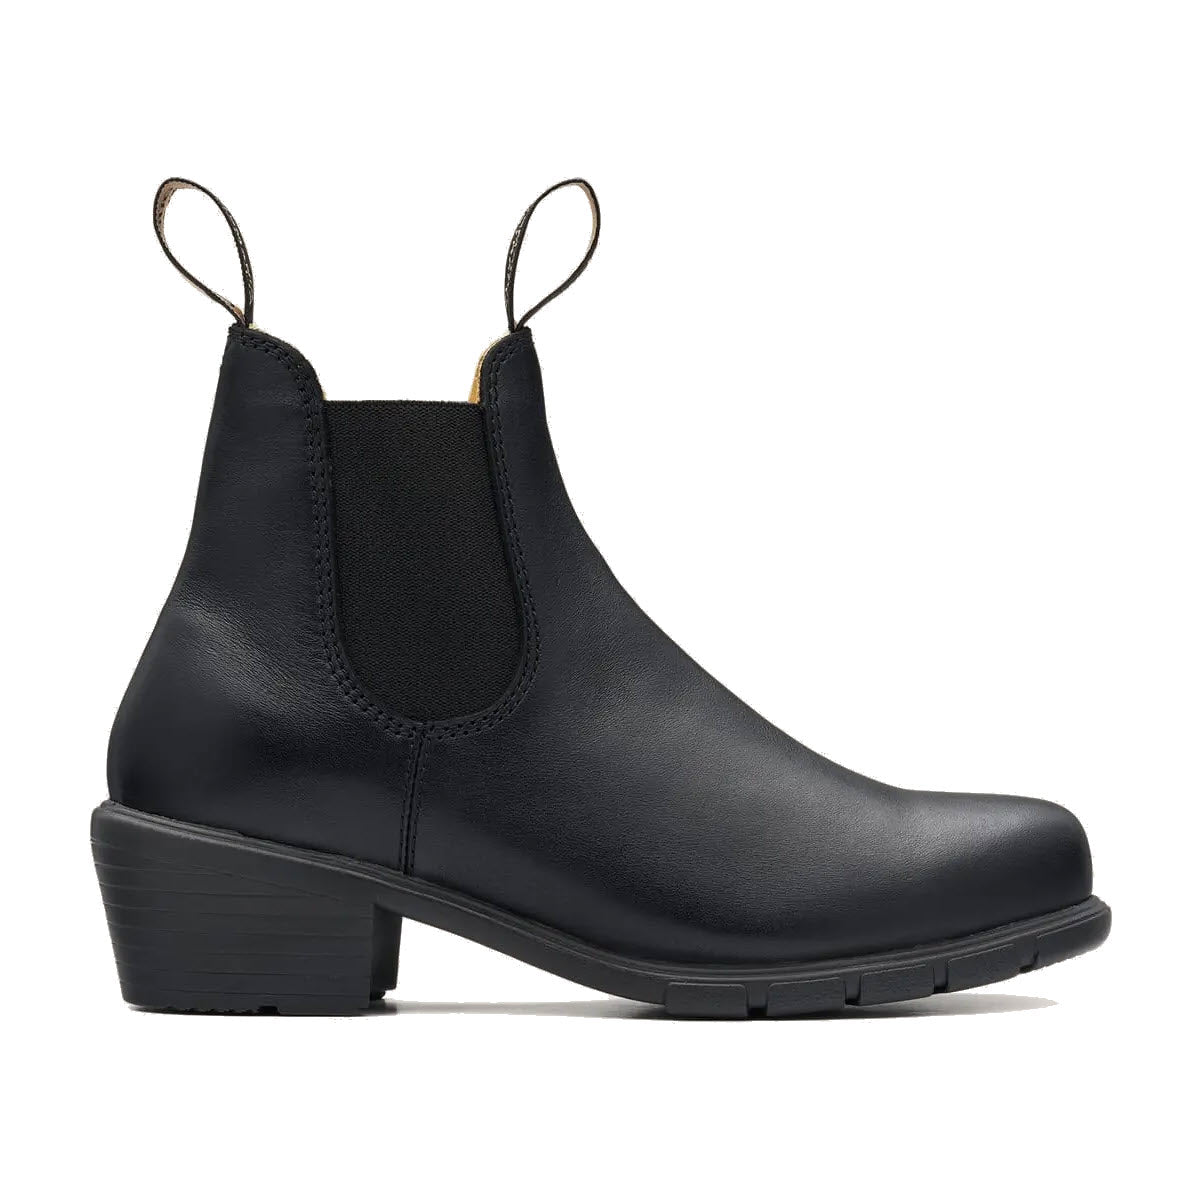 Sentence with product name and brand name: BLUNDSTONE 1671 HEELED BOOT BLACK - WOMENS by Blundstone with a low heel and pull loops, available in AU/UK sizes.